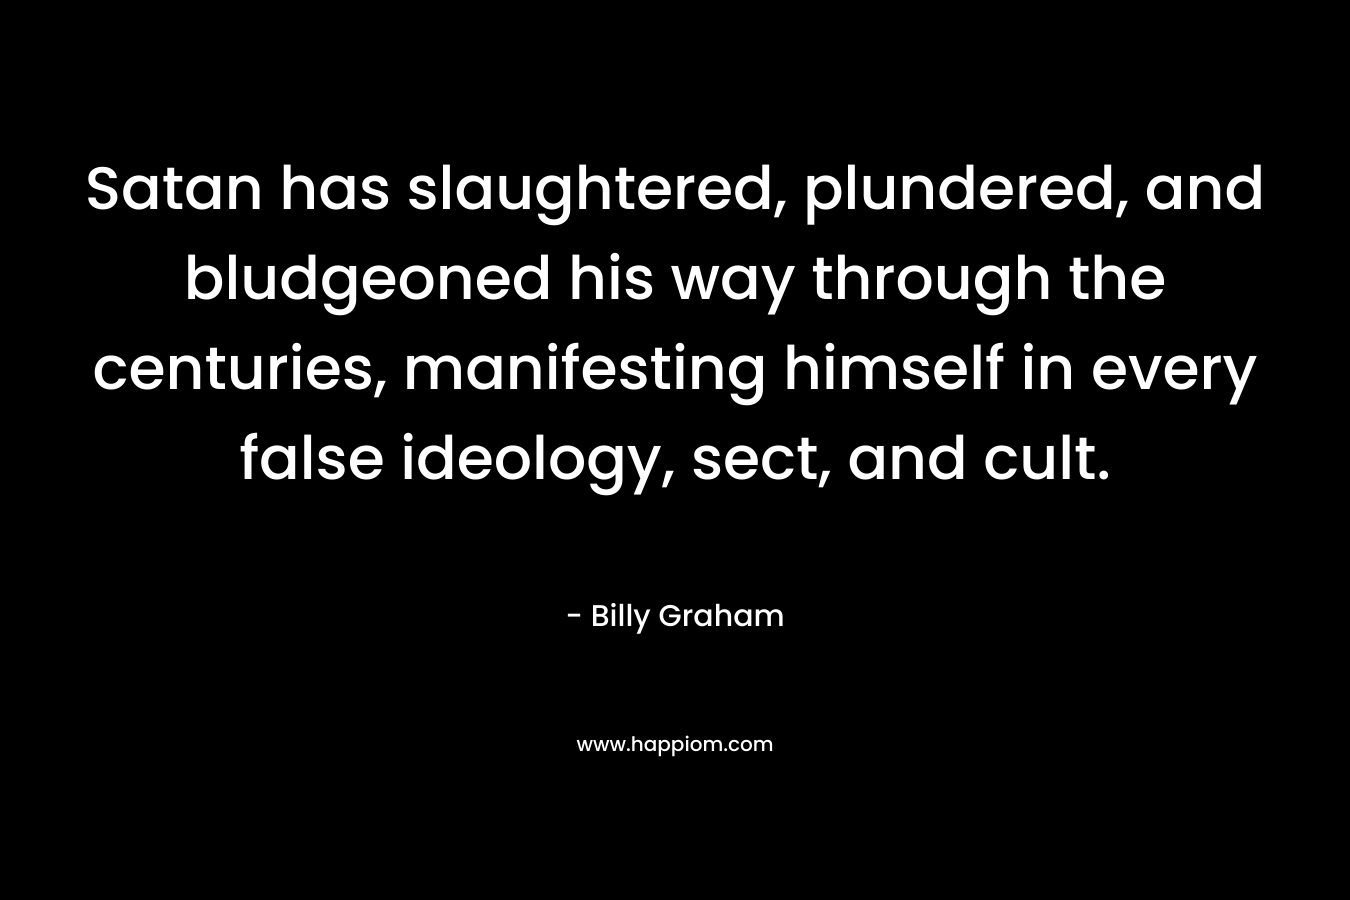 Satan has slaughtered, plundered, and bludgeoned his way through the centuries, manifesting himself in every false ideology, sect, and cult.